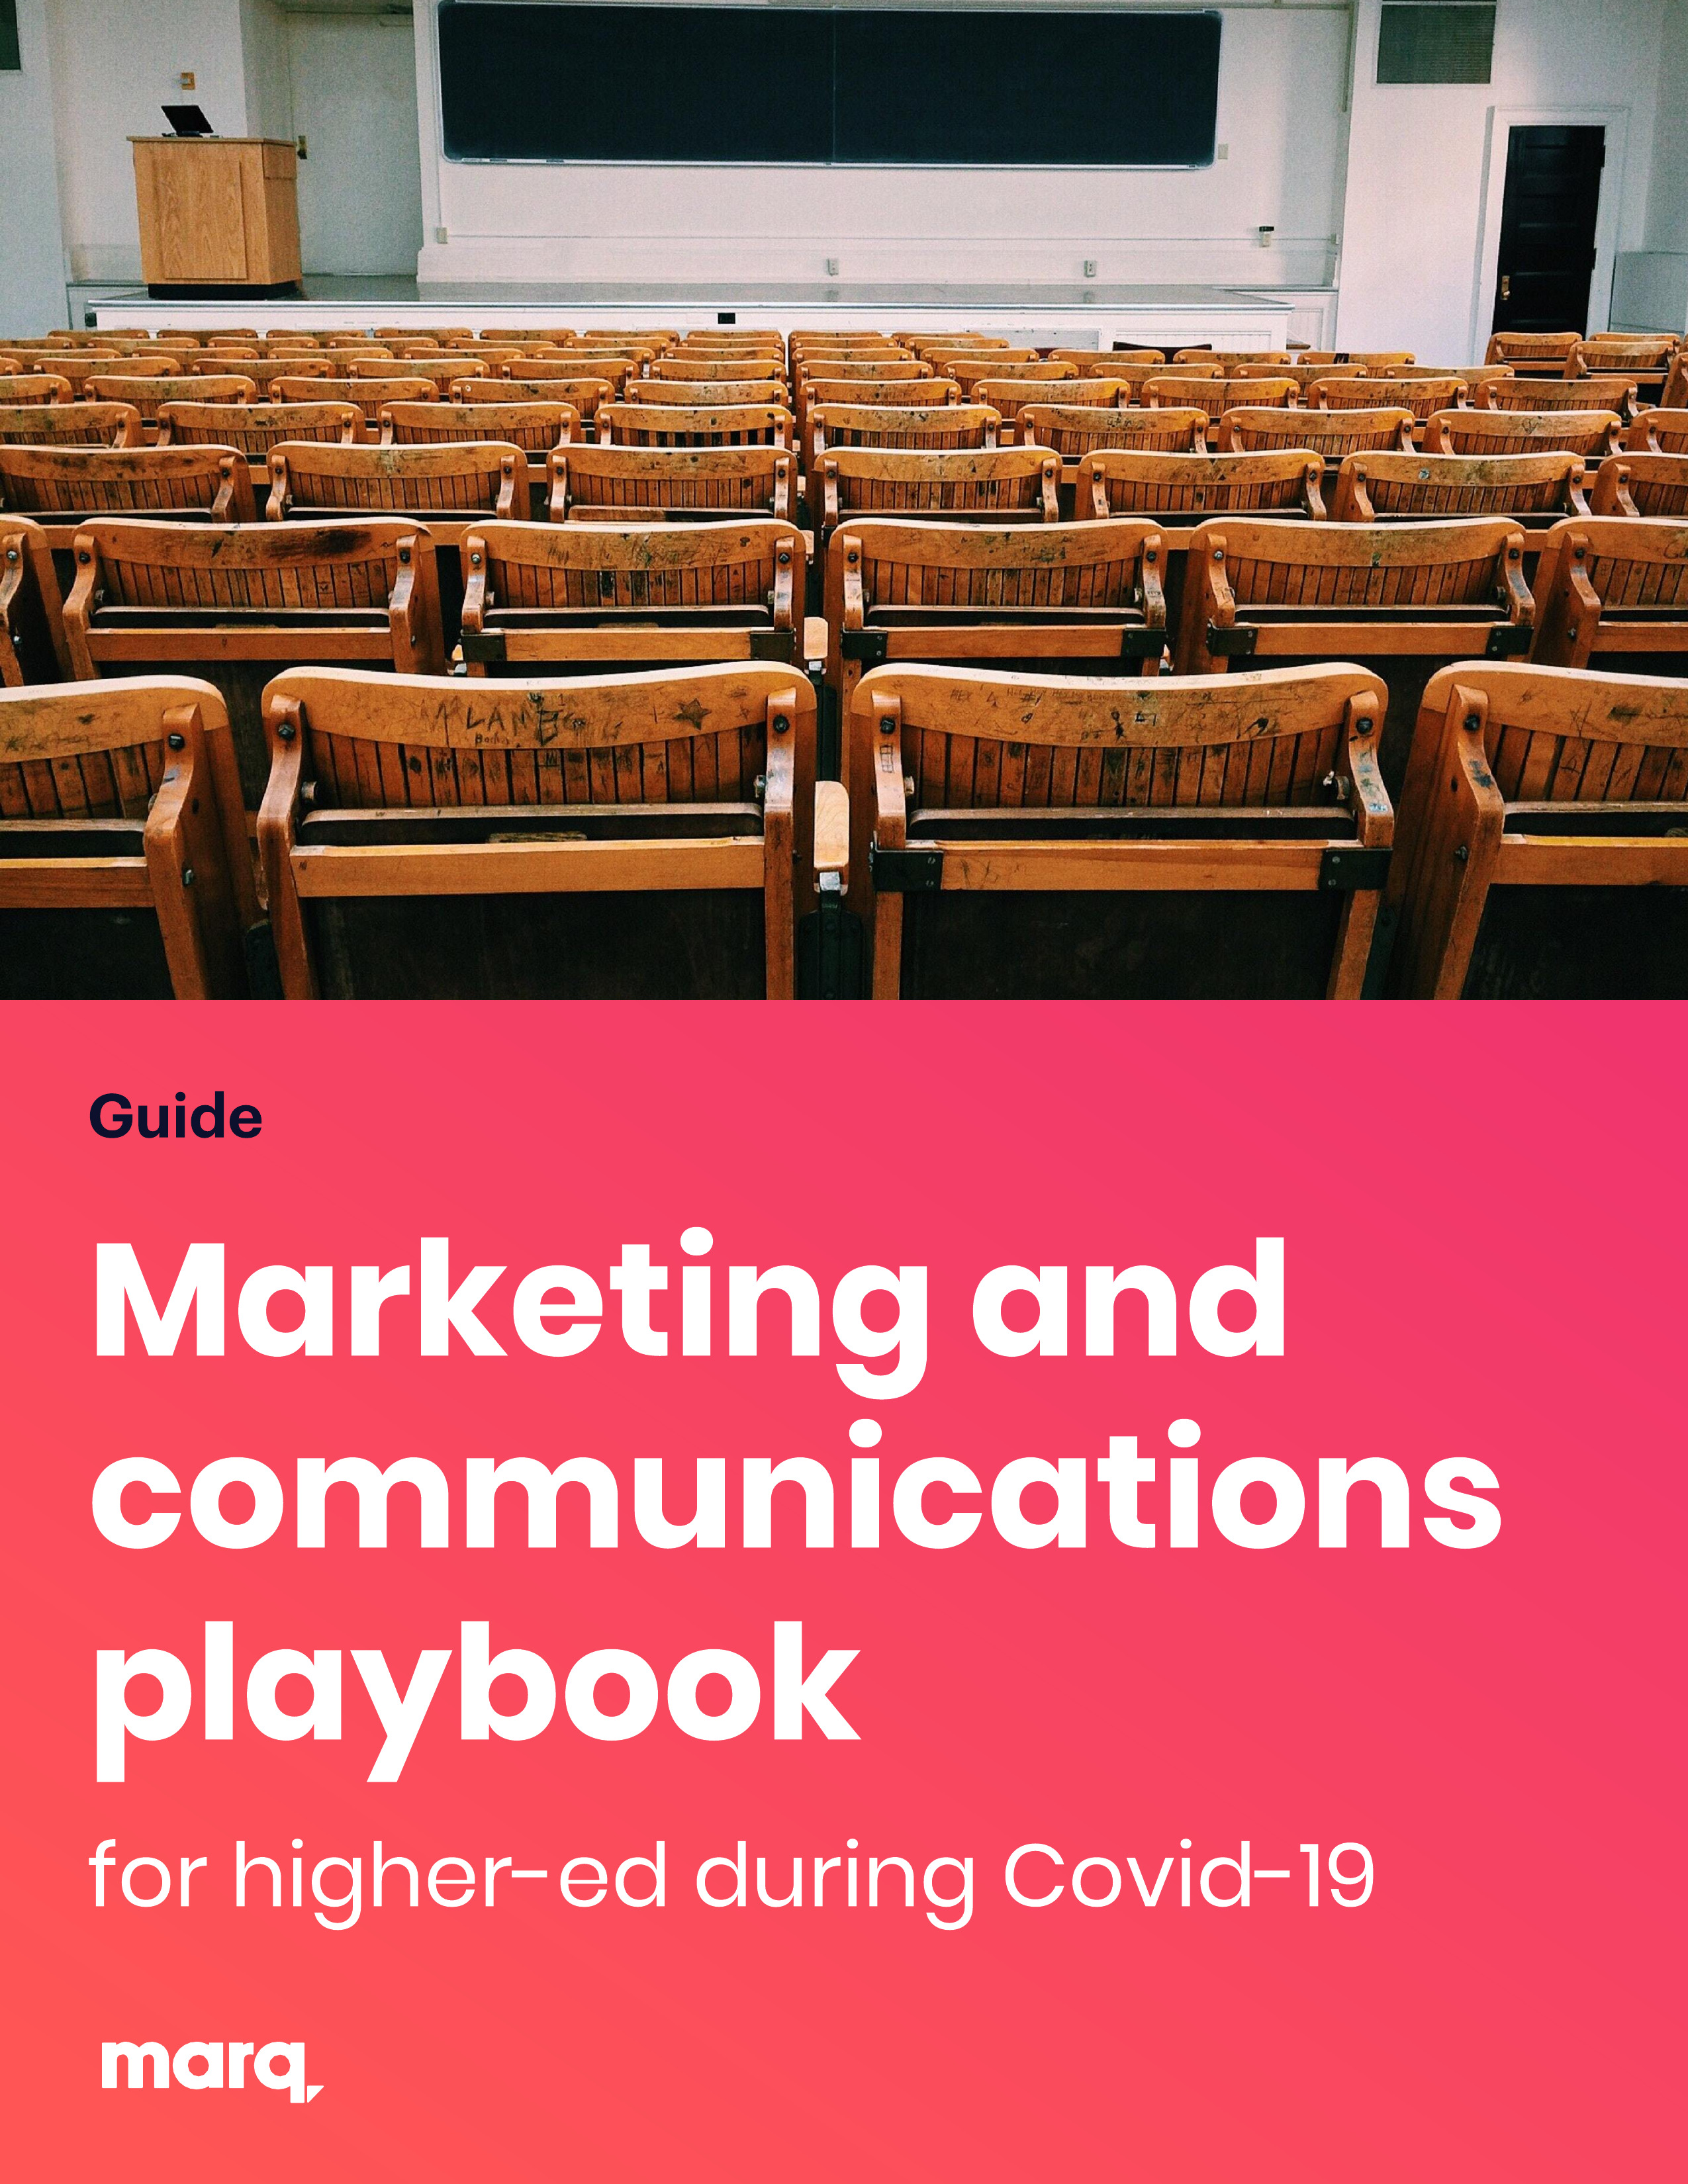 ebook-marketing-and-communications-playbook-higher-ed-covid